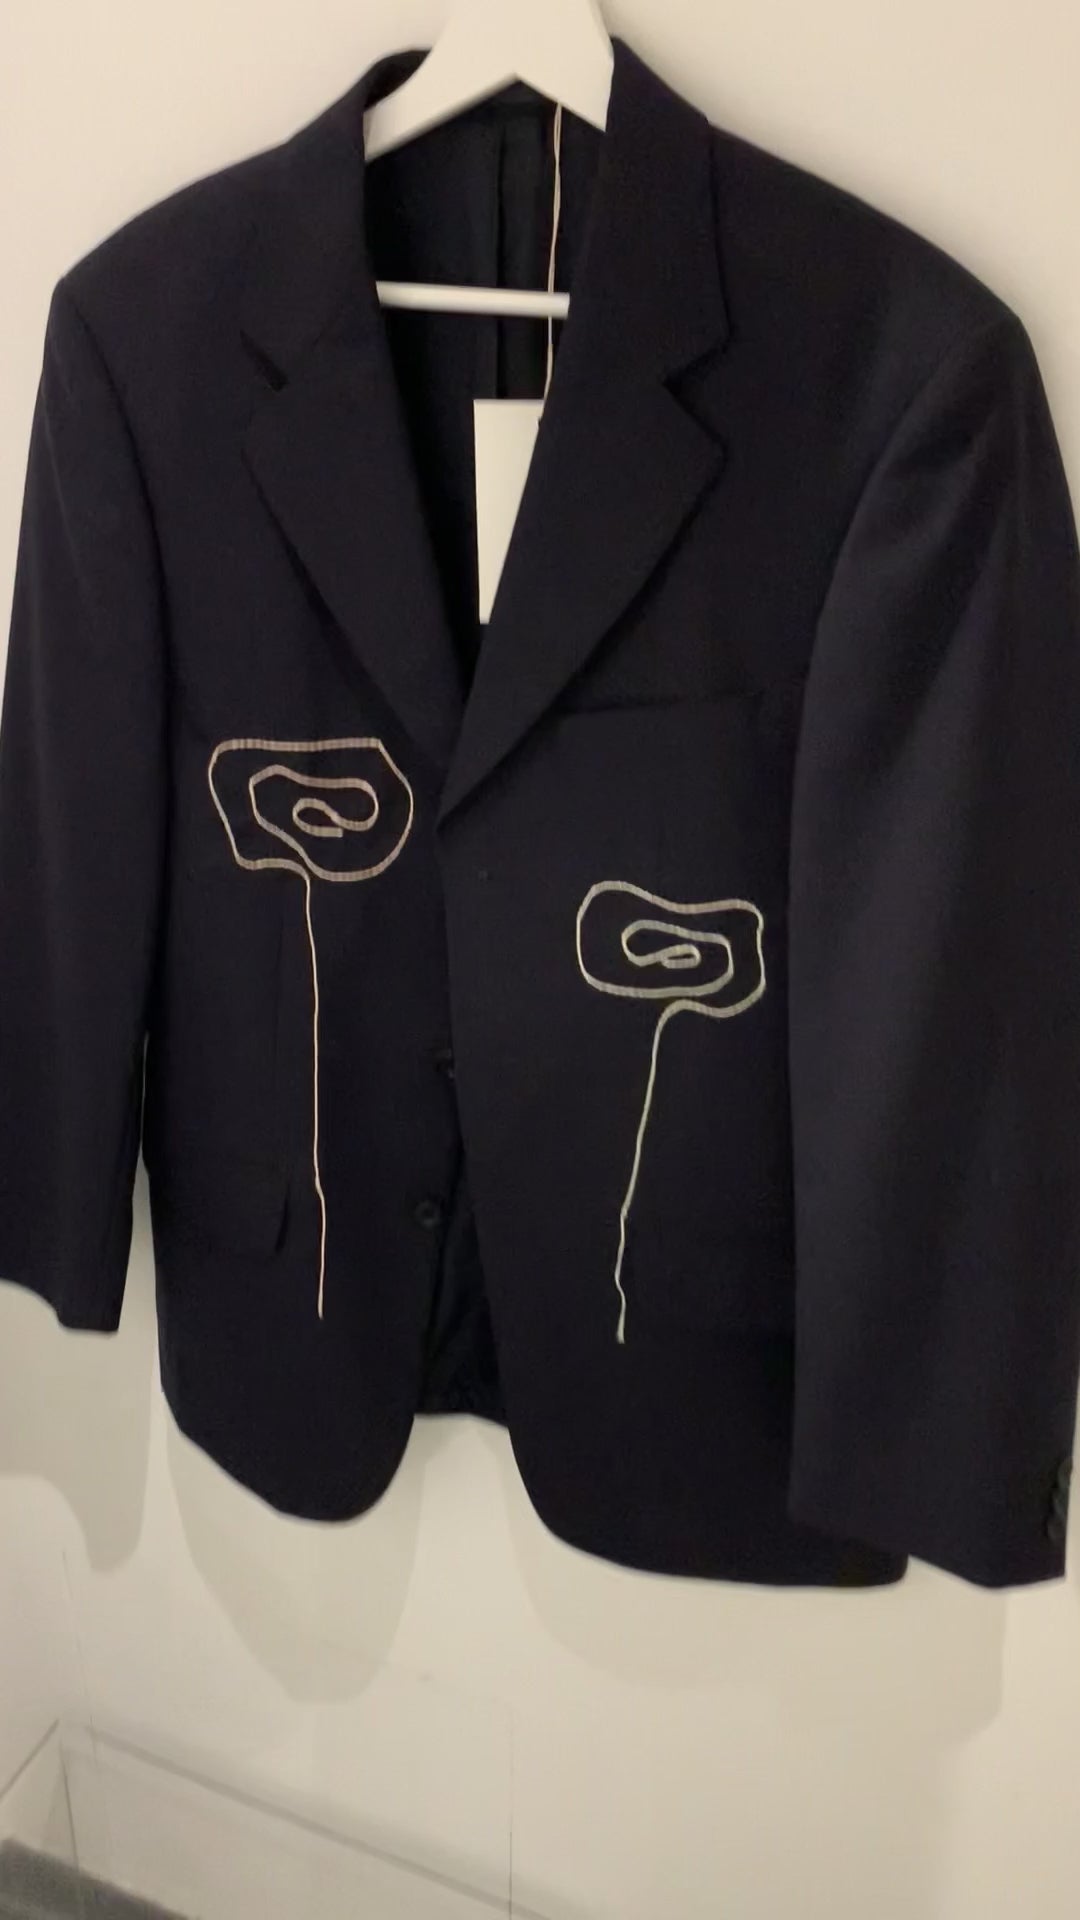 Video of blazer from front with hang tag.